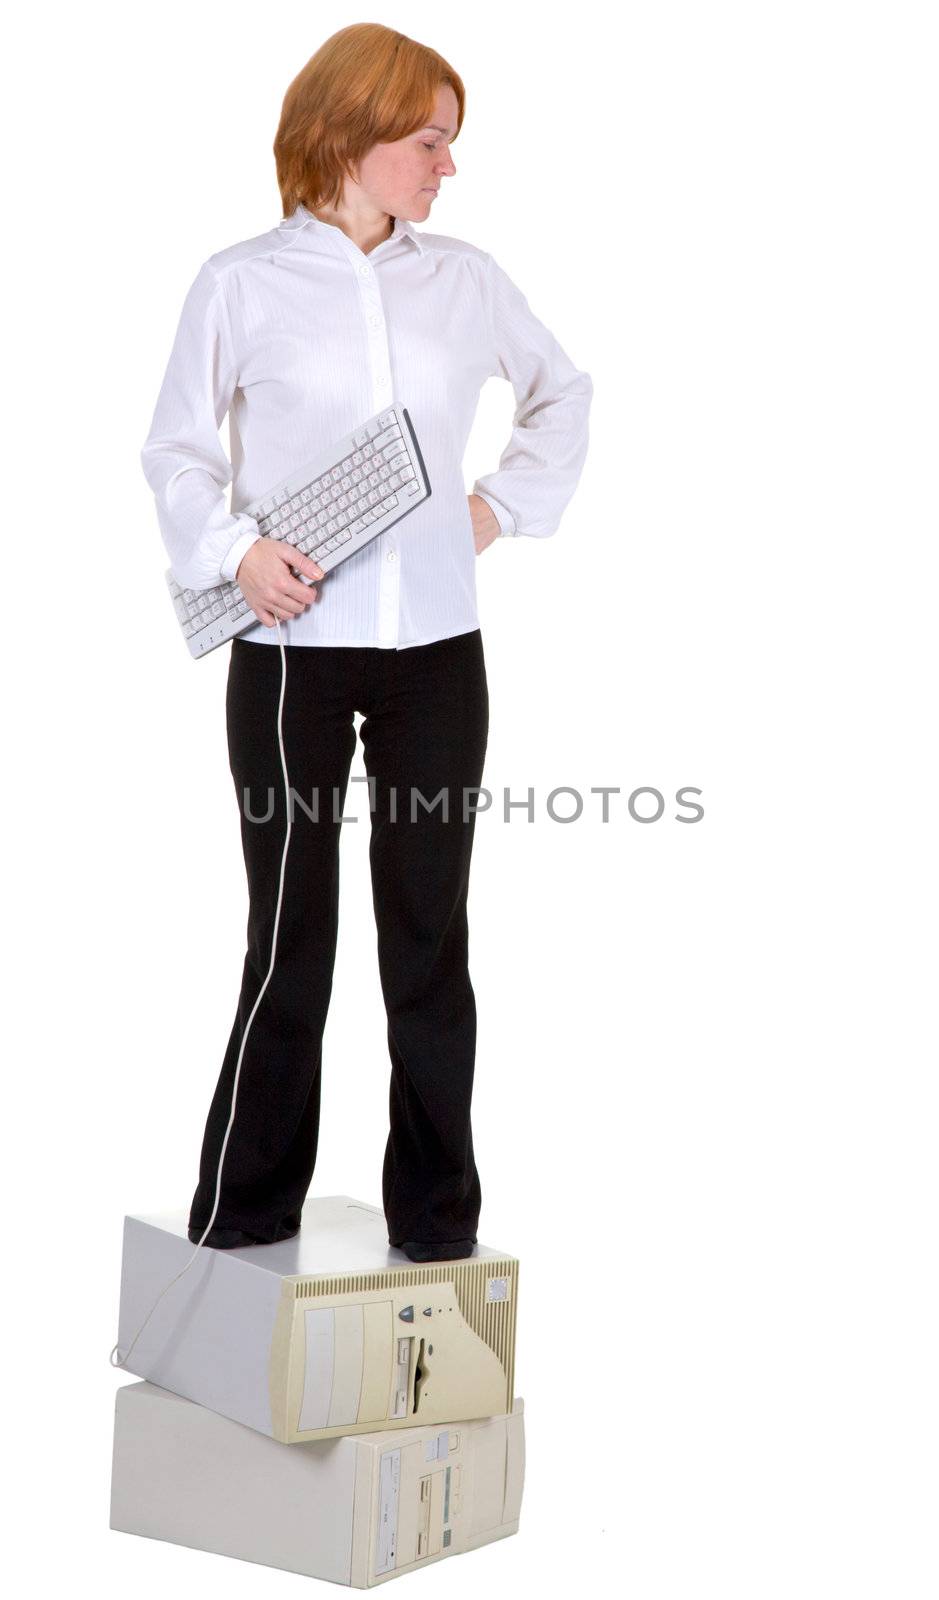 The girl standing on two computers with the keyboard